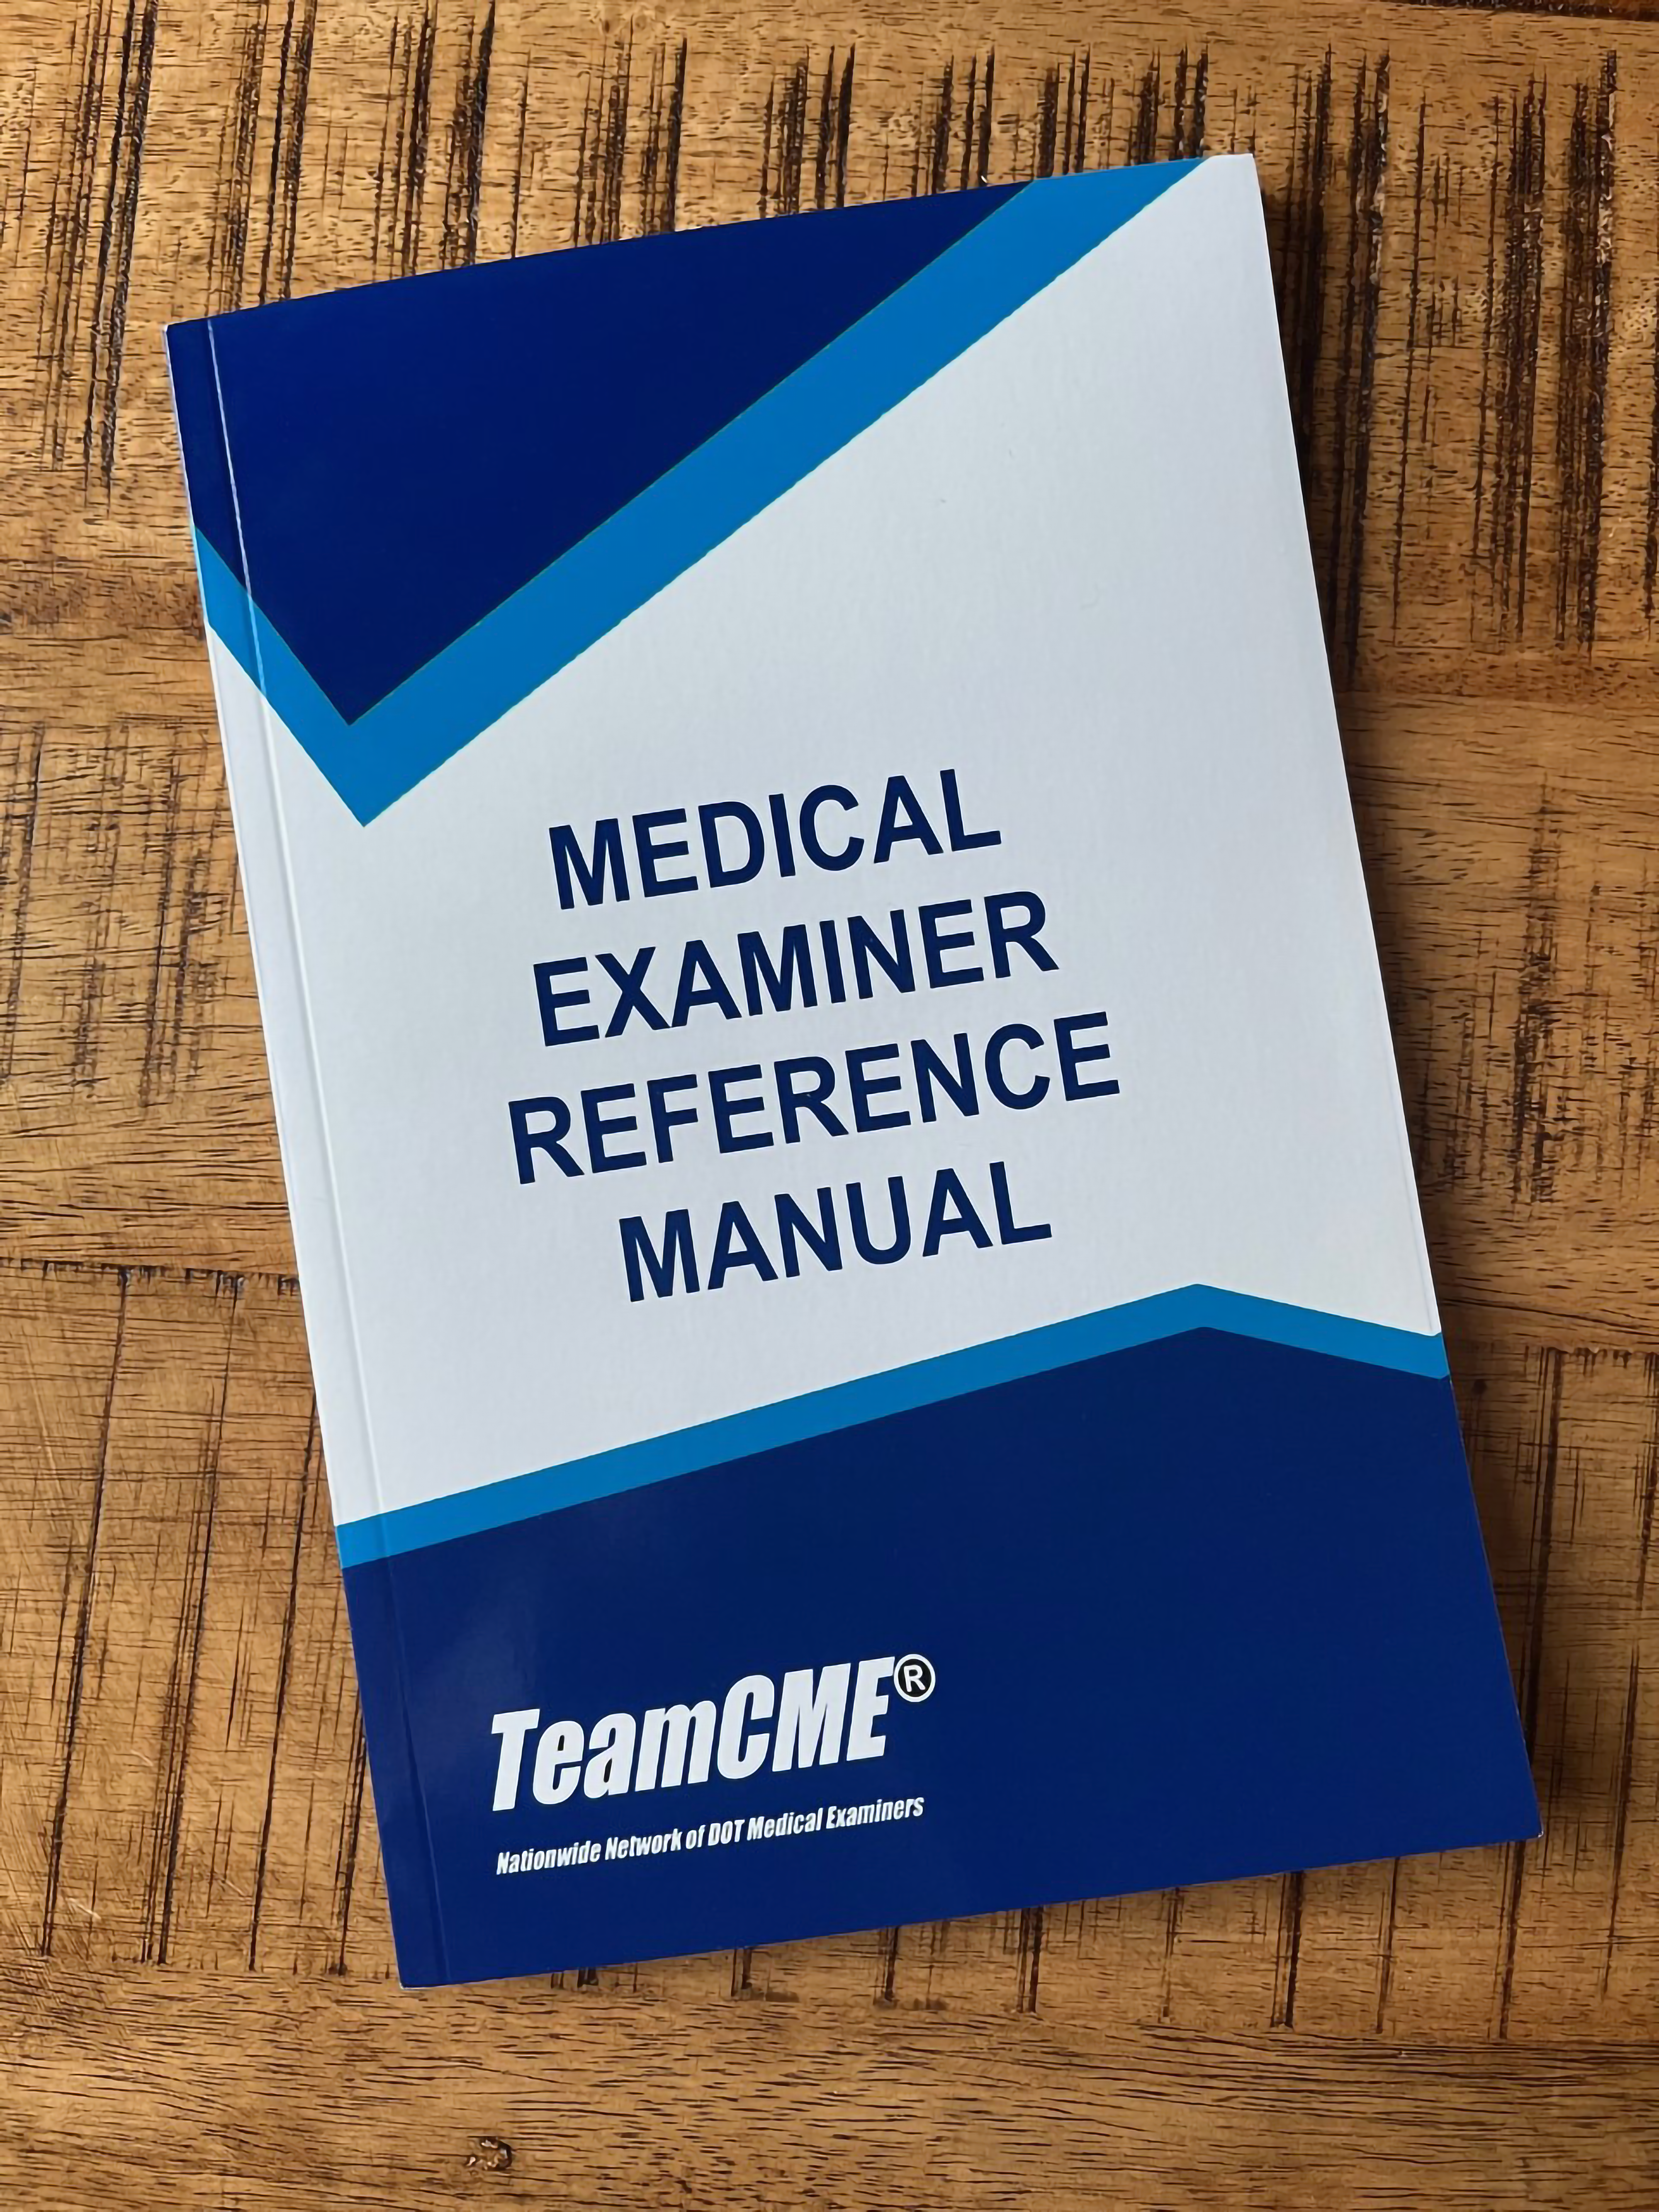 TeamCME Medical Reference Manual